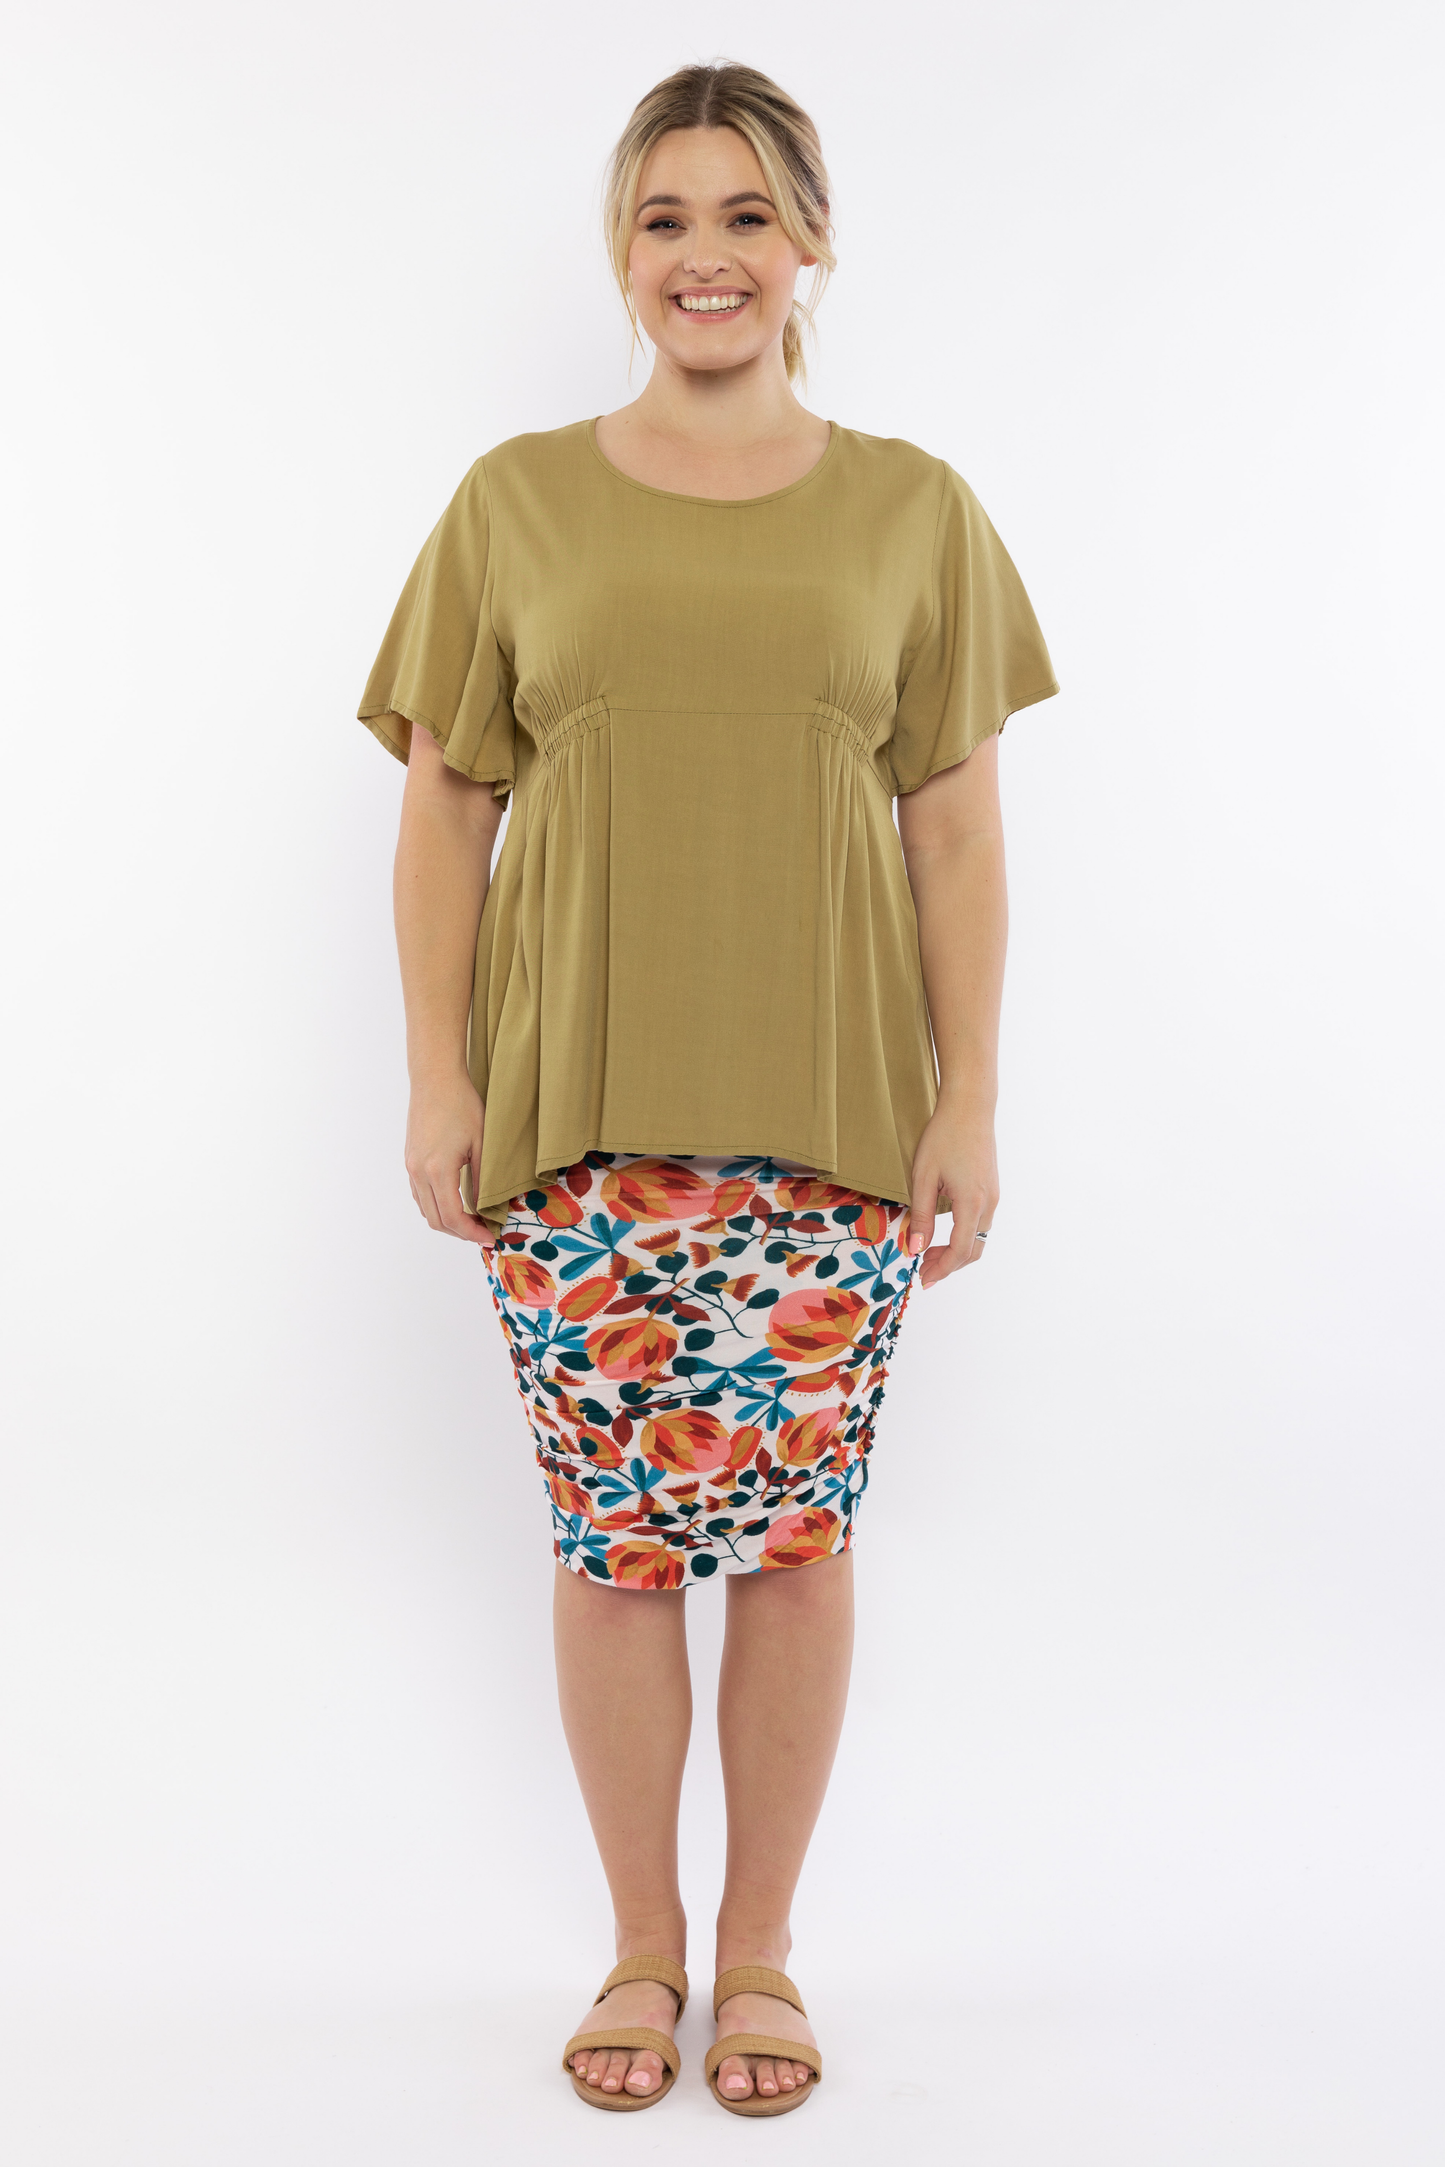 FINAL SALE Poetry Top in Olive